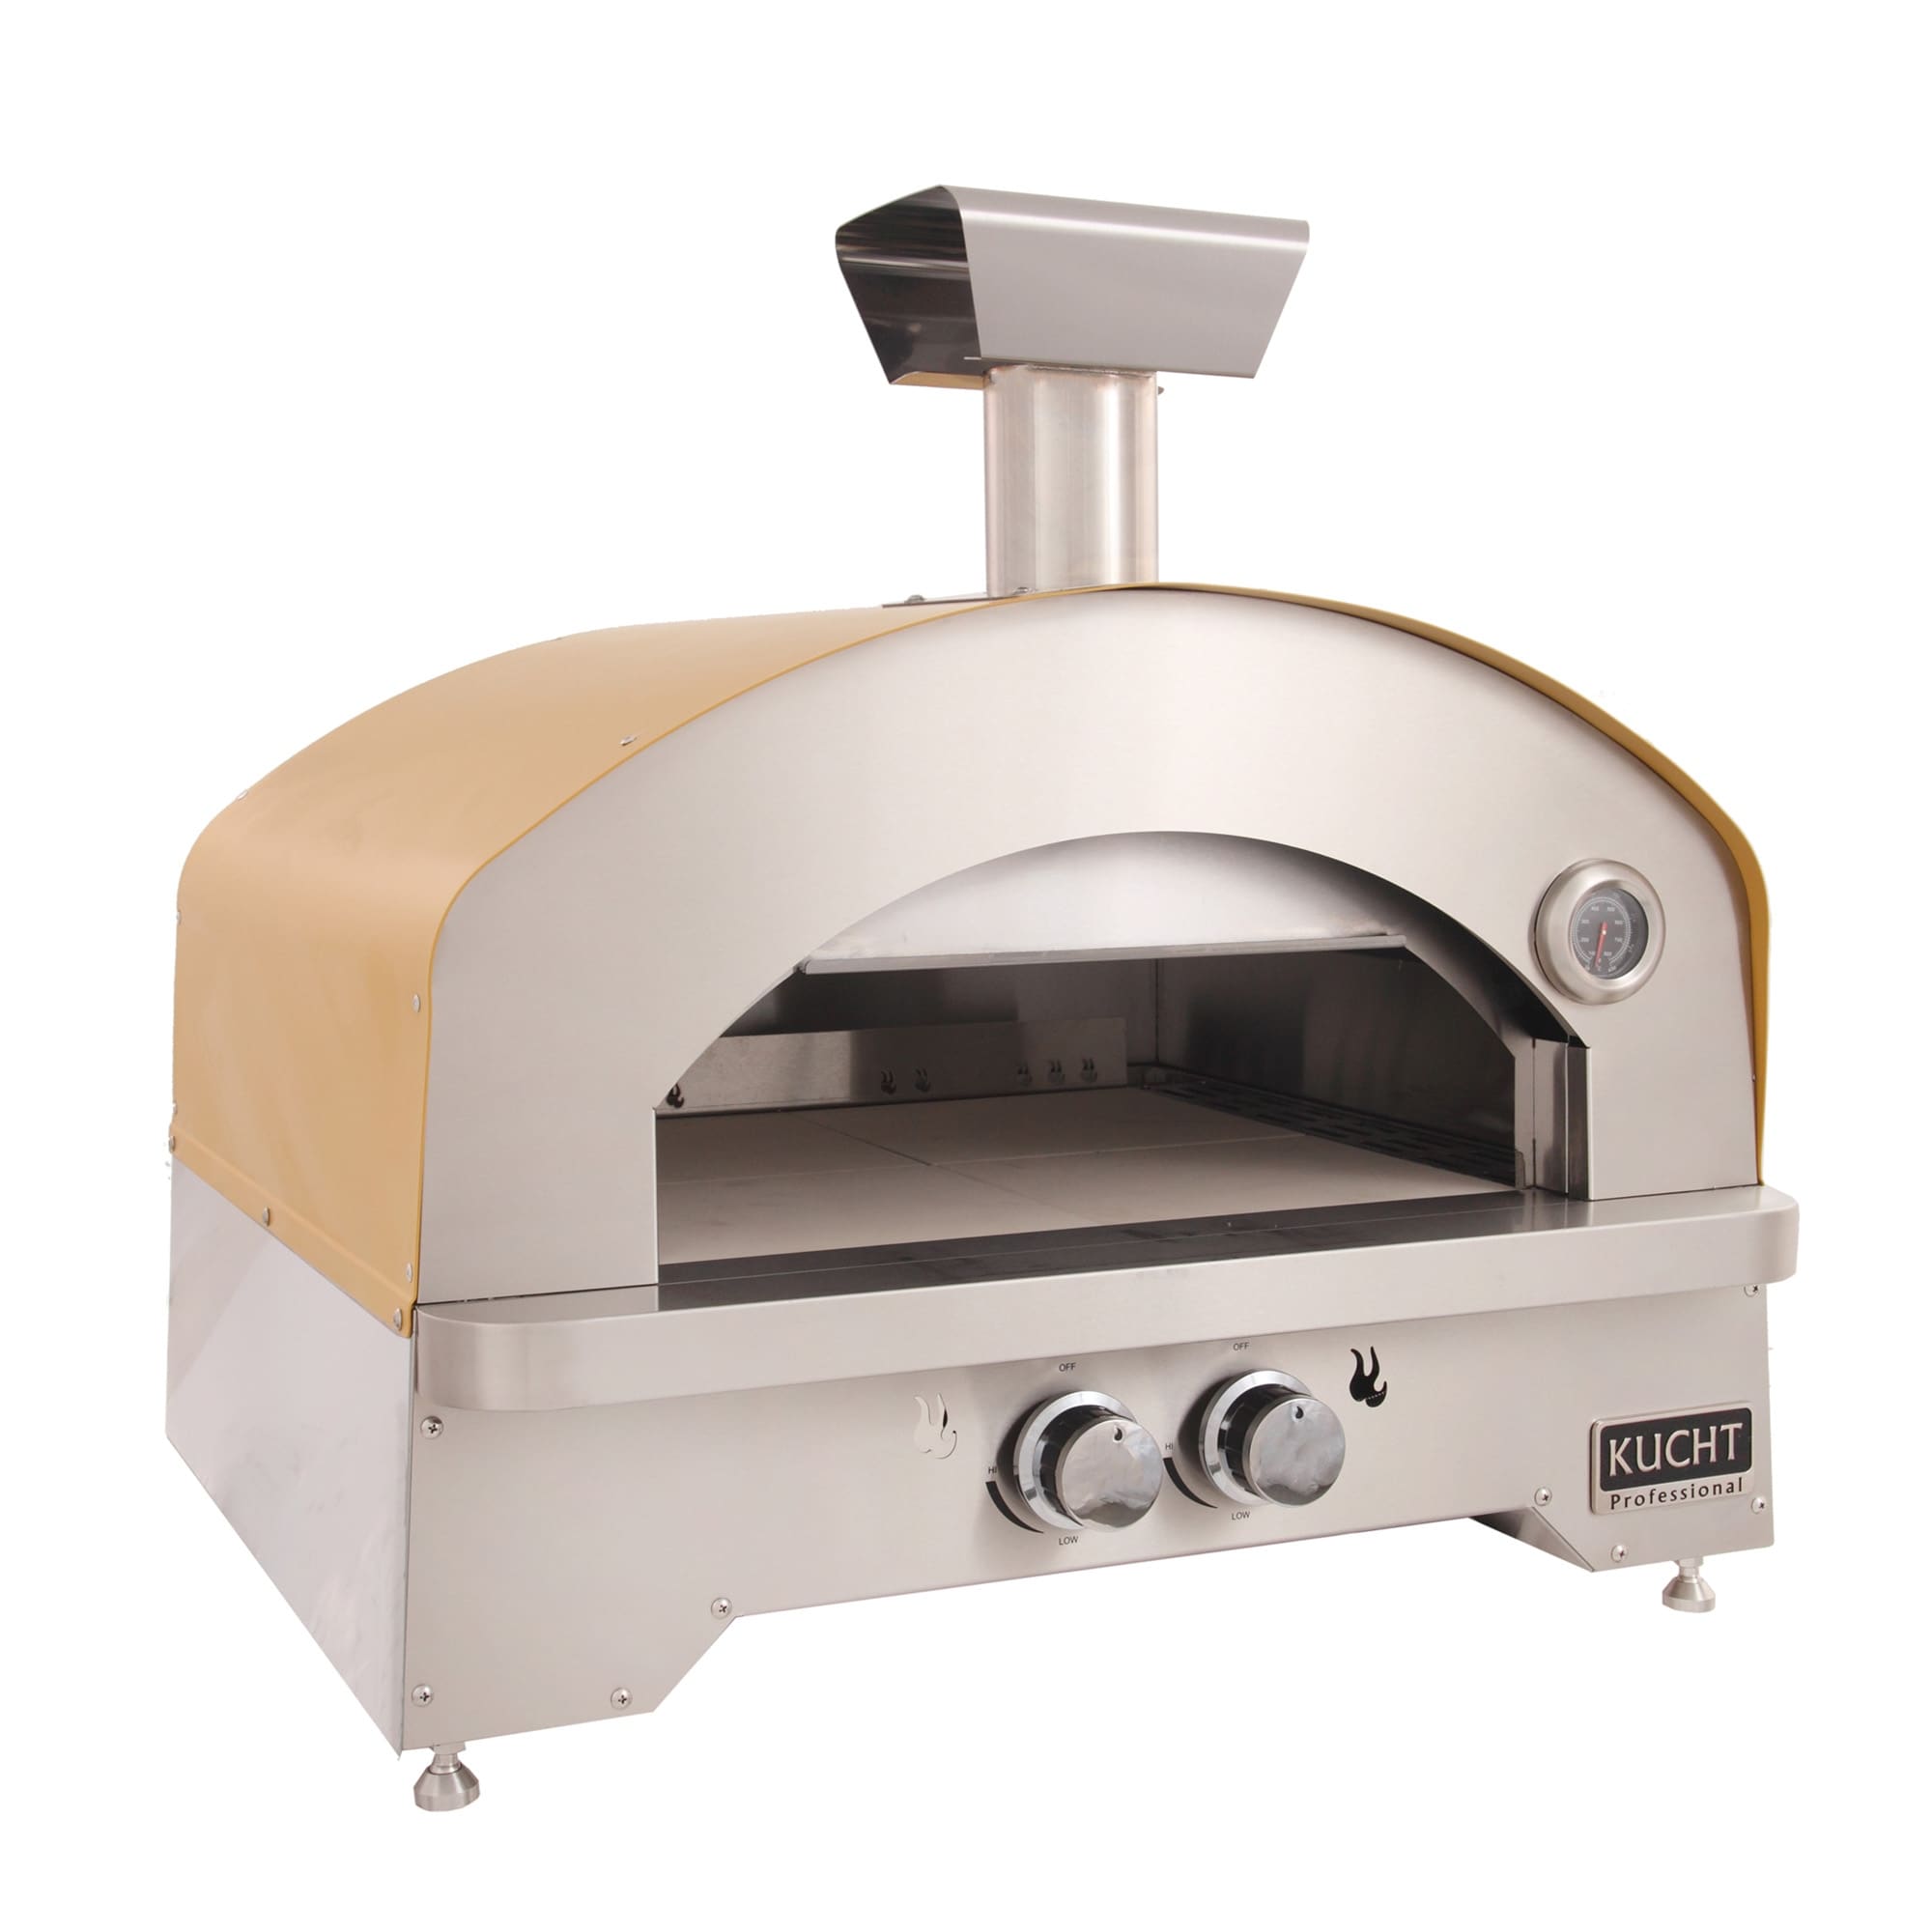 https://ak1.ostkcdn.com/images/products/is/images/direct/74b8f7beb335ad38d653e39ca92ed017a9c09688/Outdoor-Indoor-Portable-Propane-Gas-Pizza-Oven.jpg